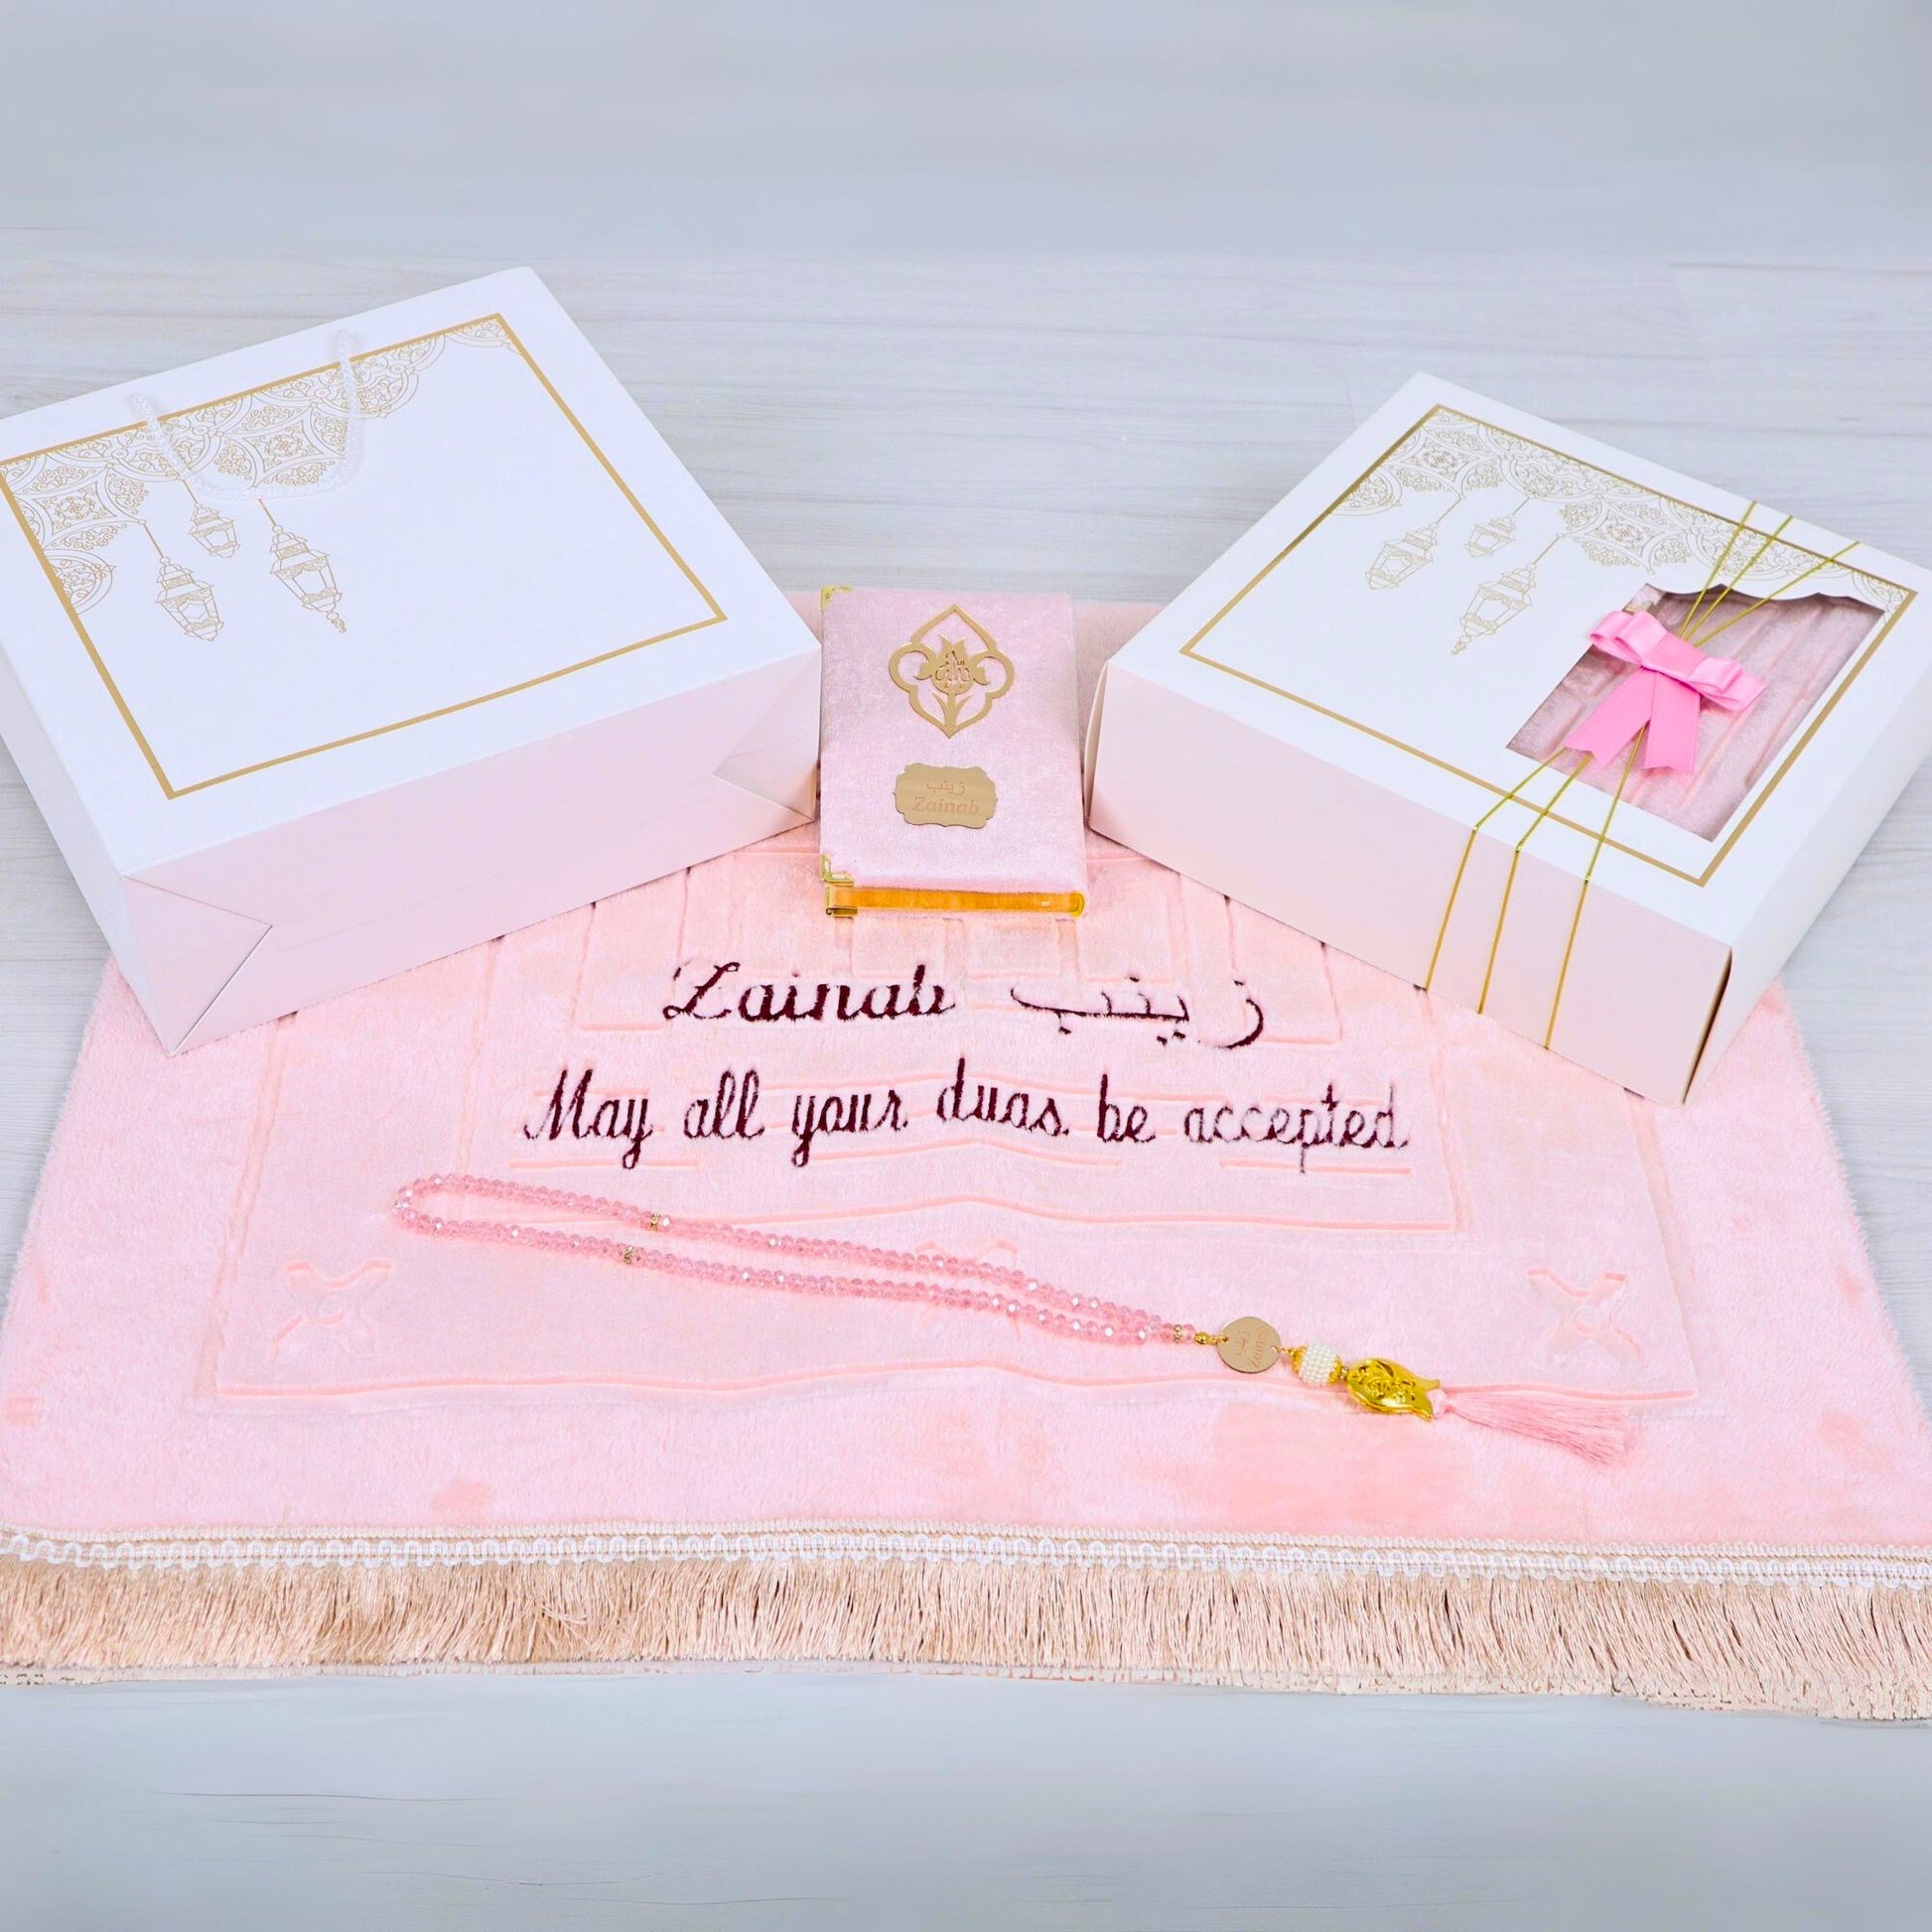 Personalized Soft Plush Prayer Mat Quran Tasbeeh Islamic Gift Set - Islamic Elite Favors is a handmade gift shop offering a wide variety of unique and personalized gifts for all occasions. Whether you're looking for the perfect Ramadan, Eid, Hajj, wedding gift or something special for a birthday, baby shower or anniversary, we have something for everyone. High quality, made with love.